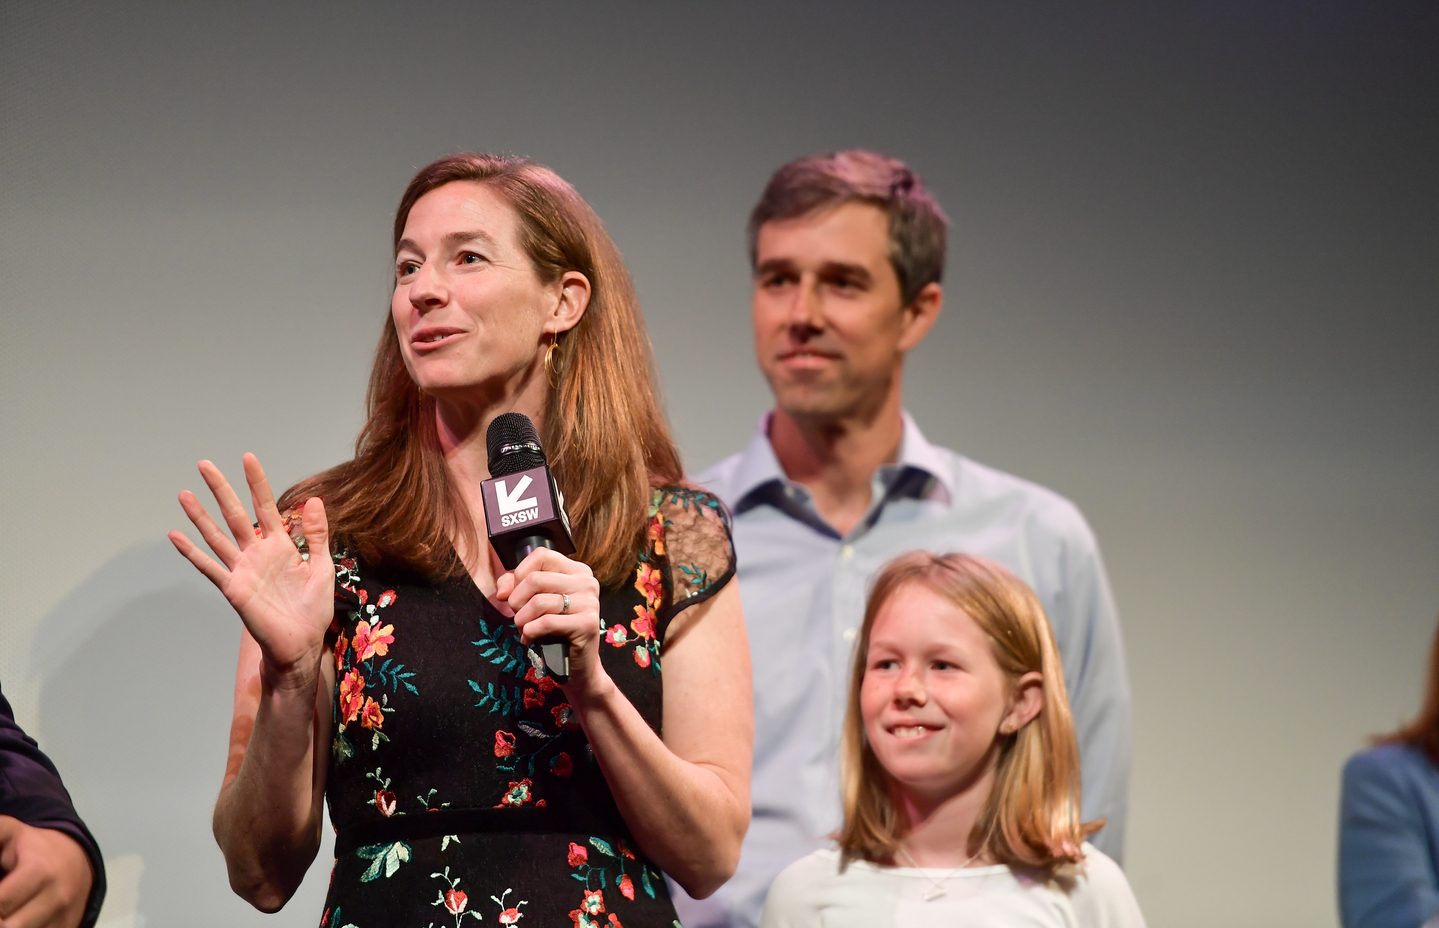 Amy Hooer Sanders, Beto O'Rourke, and Molly O'Rourke attend the Running with Beto Premiere at the Paramount Theatre.